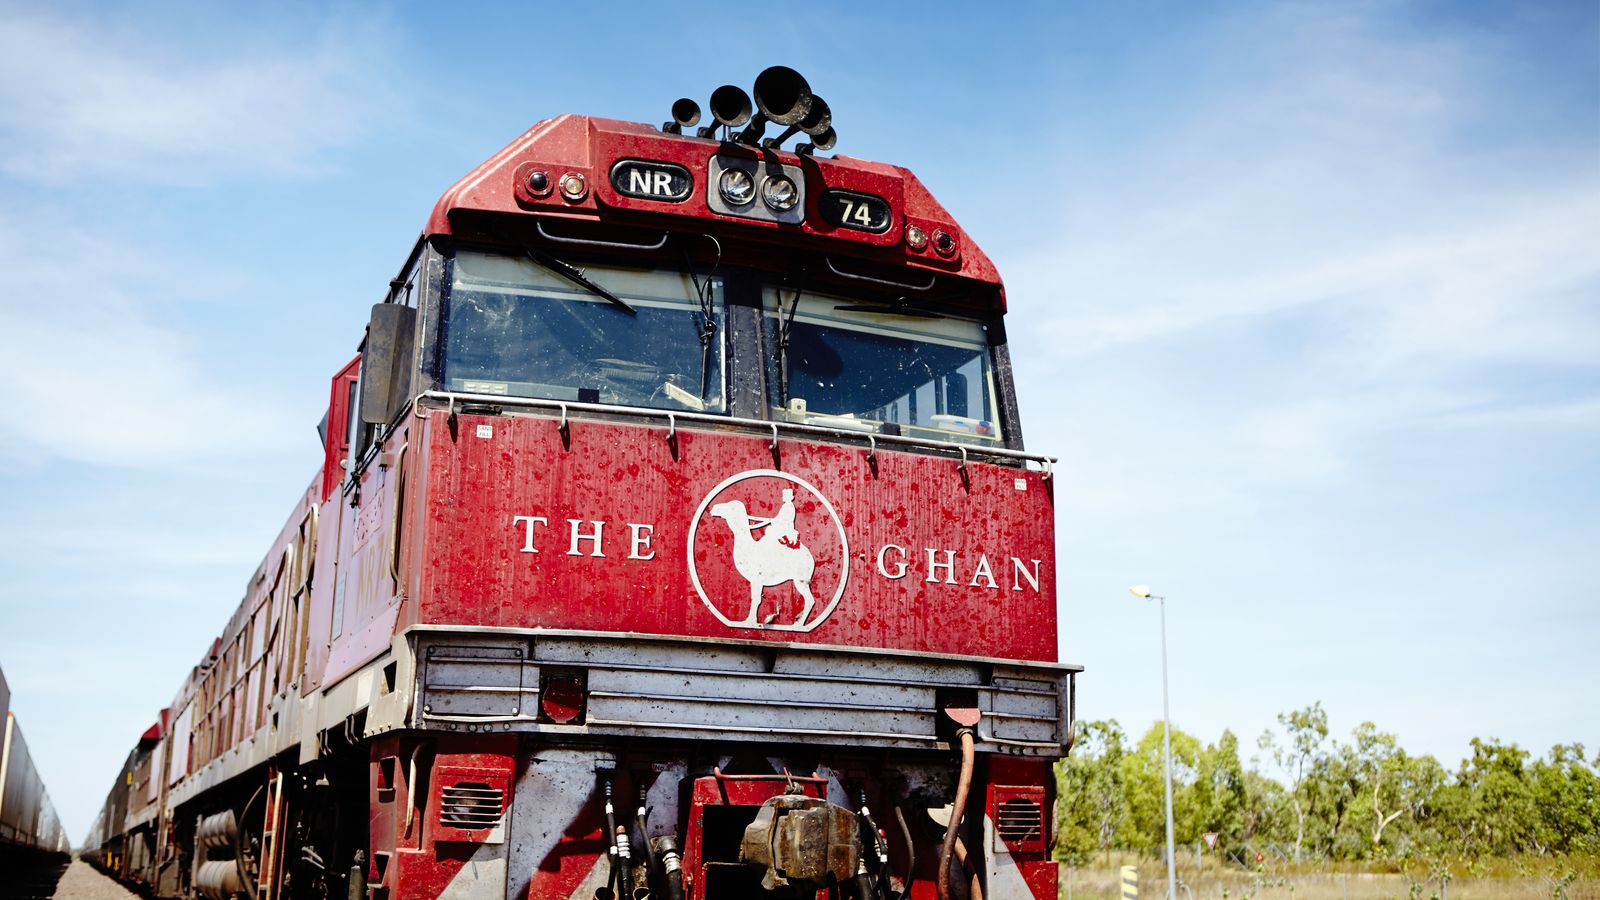 Car carrying two teenagers rolls after colliding with the Ghan train in SA